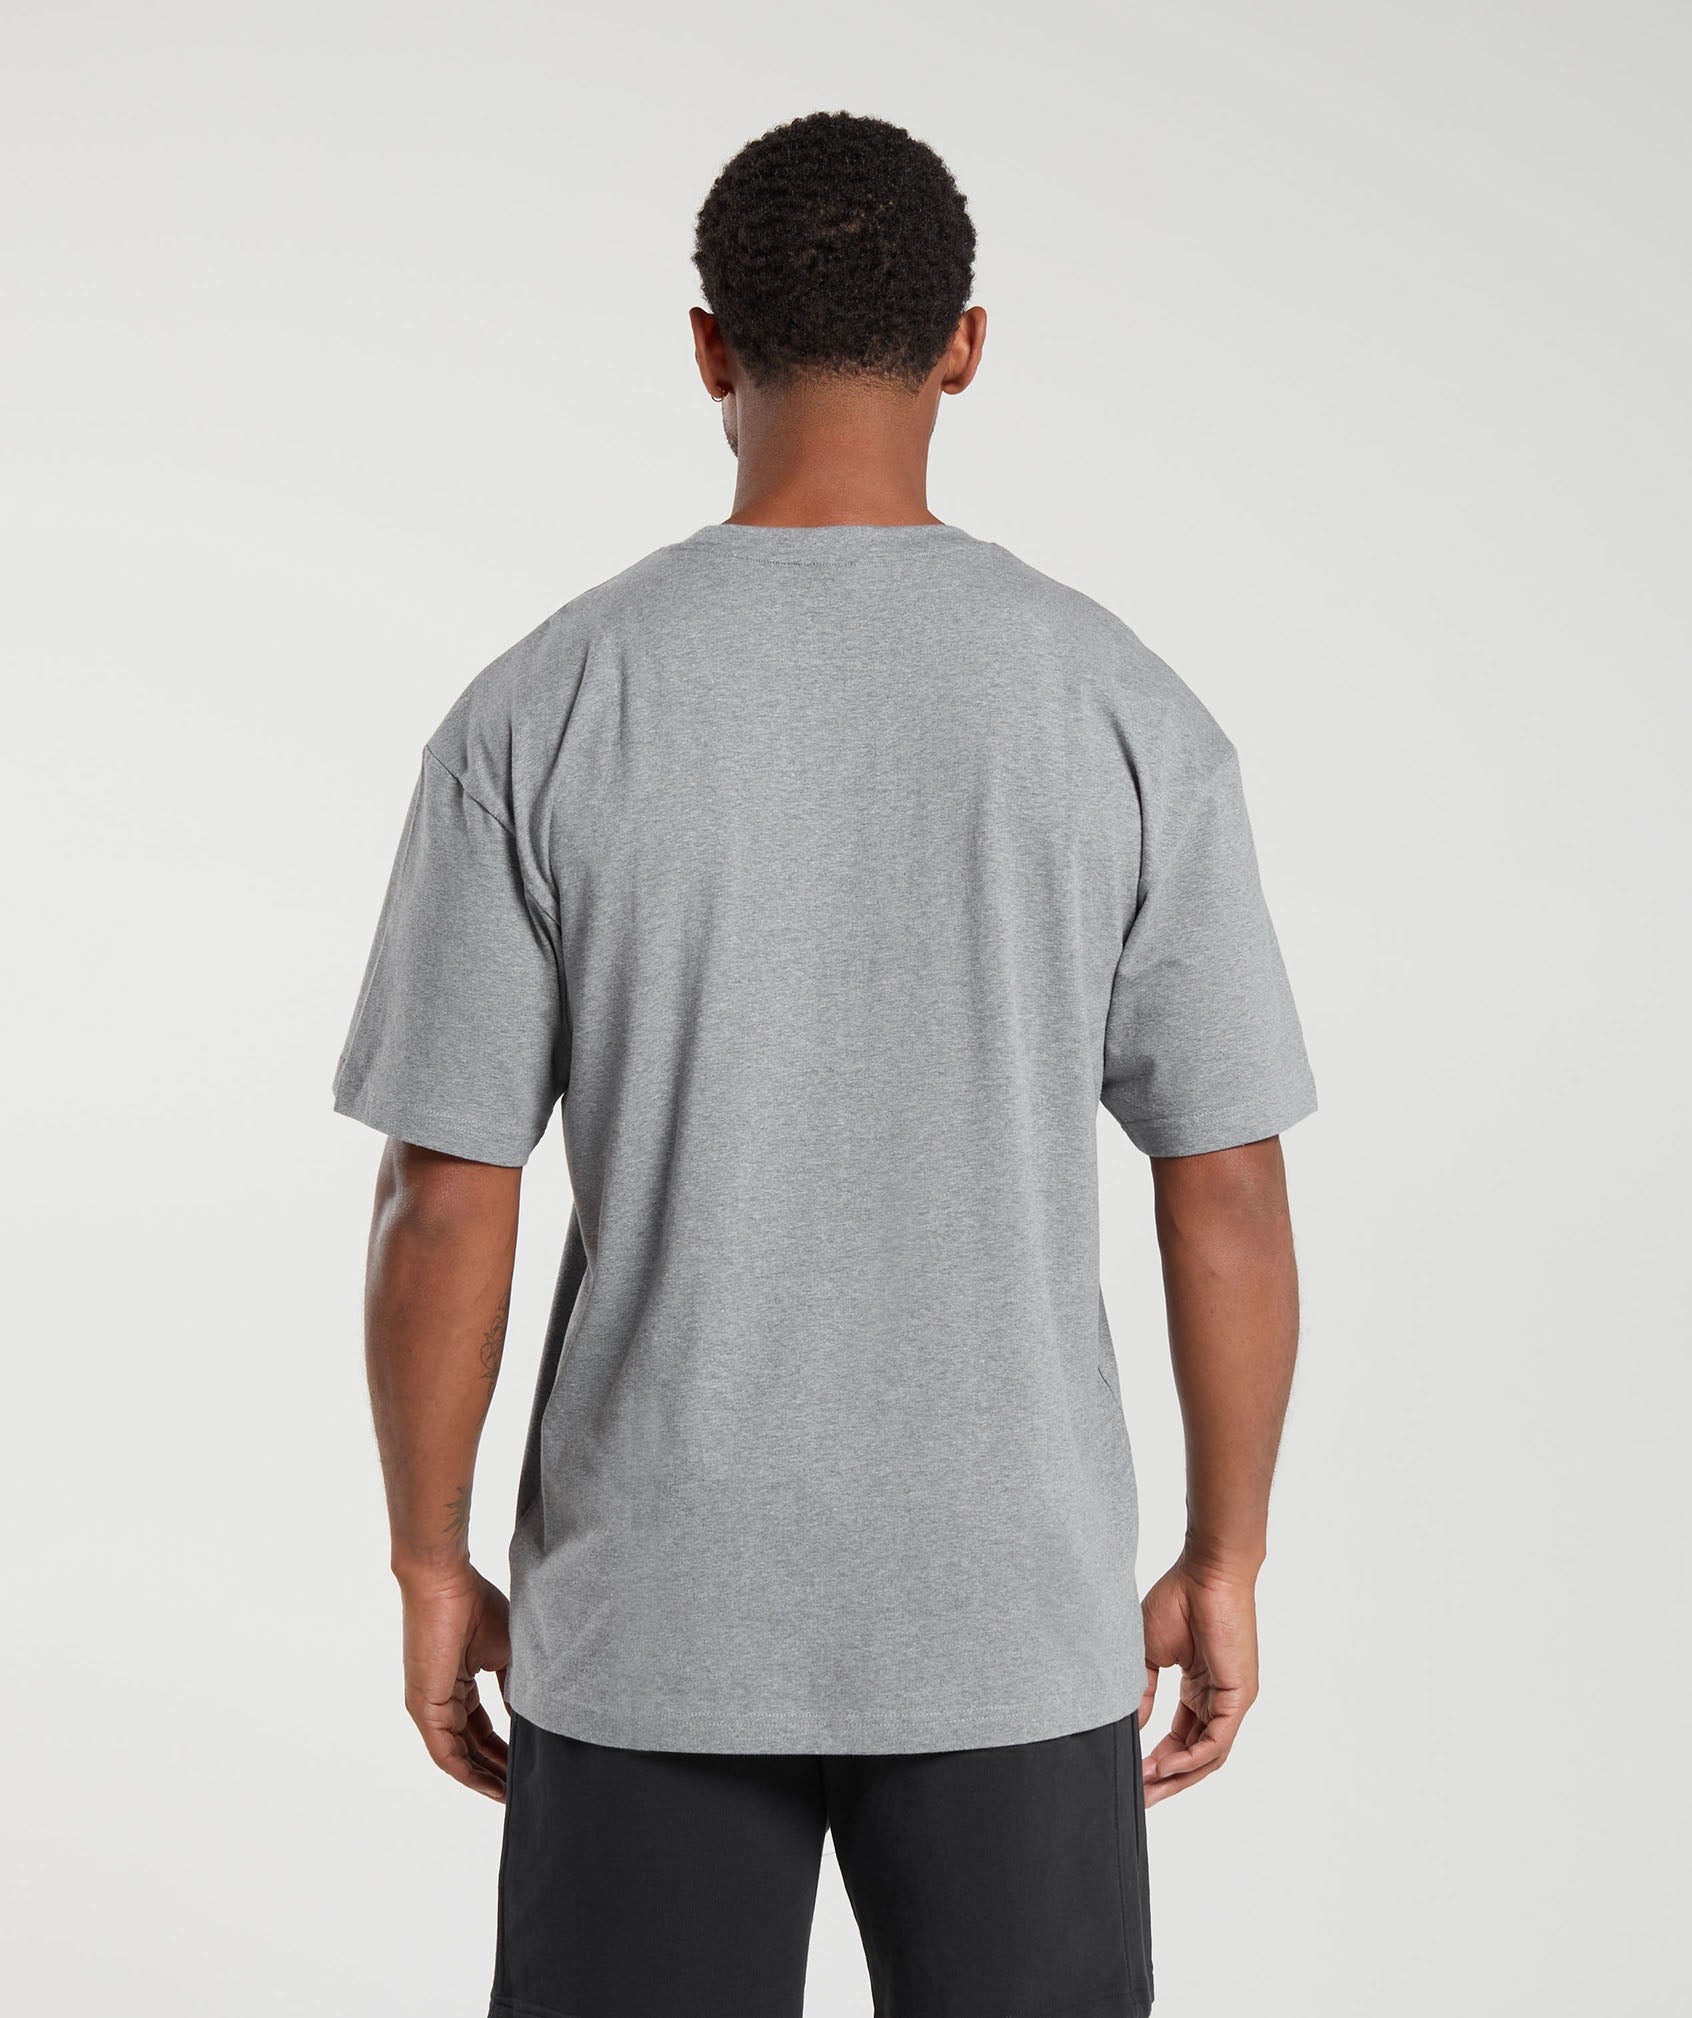 Essential Oversized T-Shirt in Charcoal Grey Marl - view 2